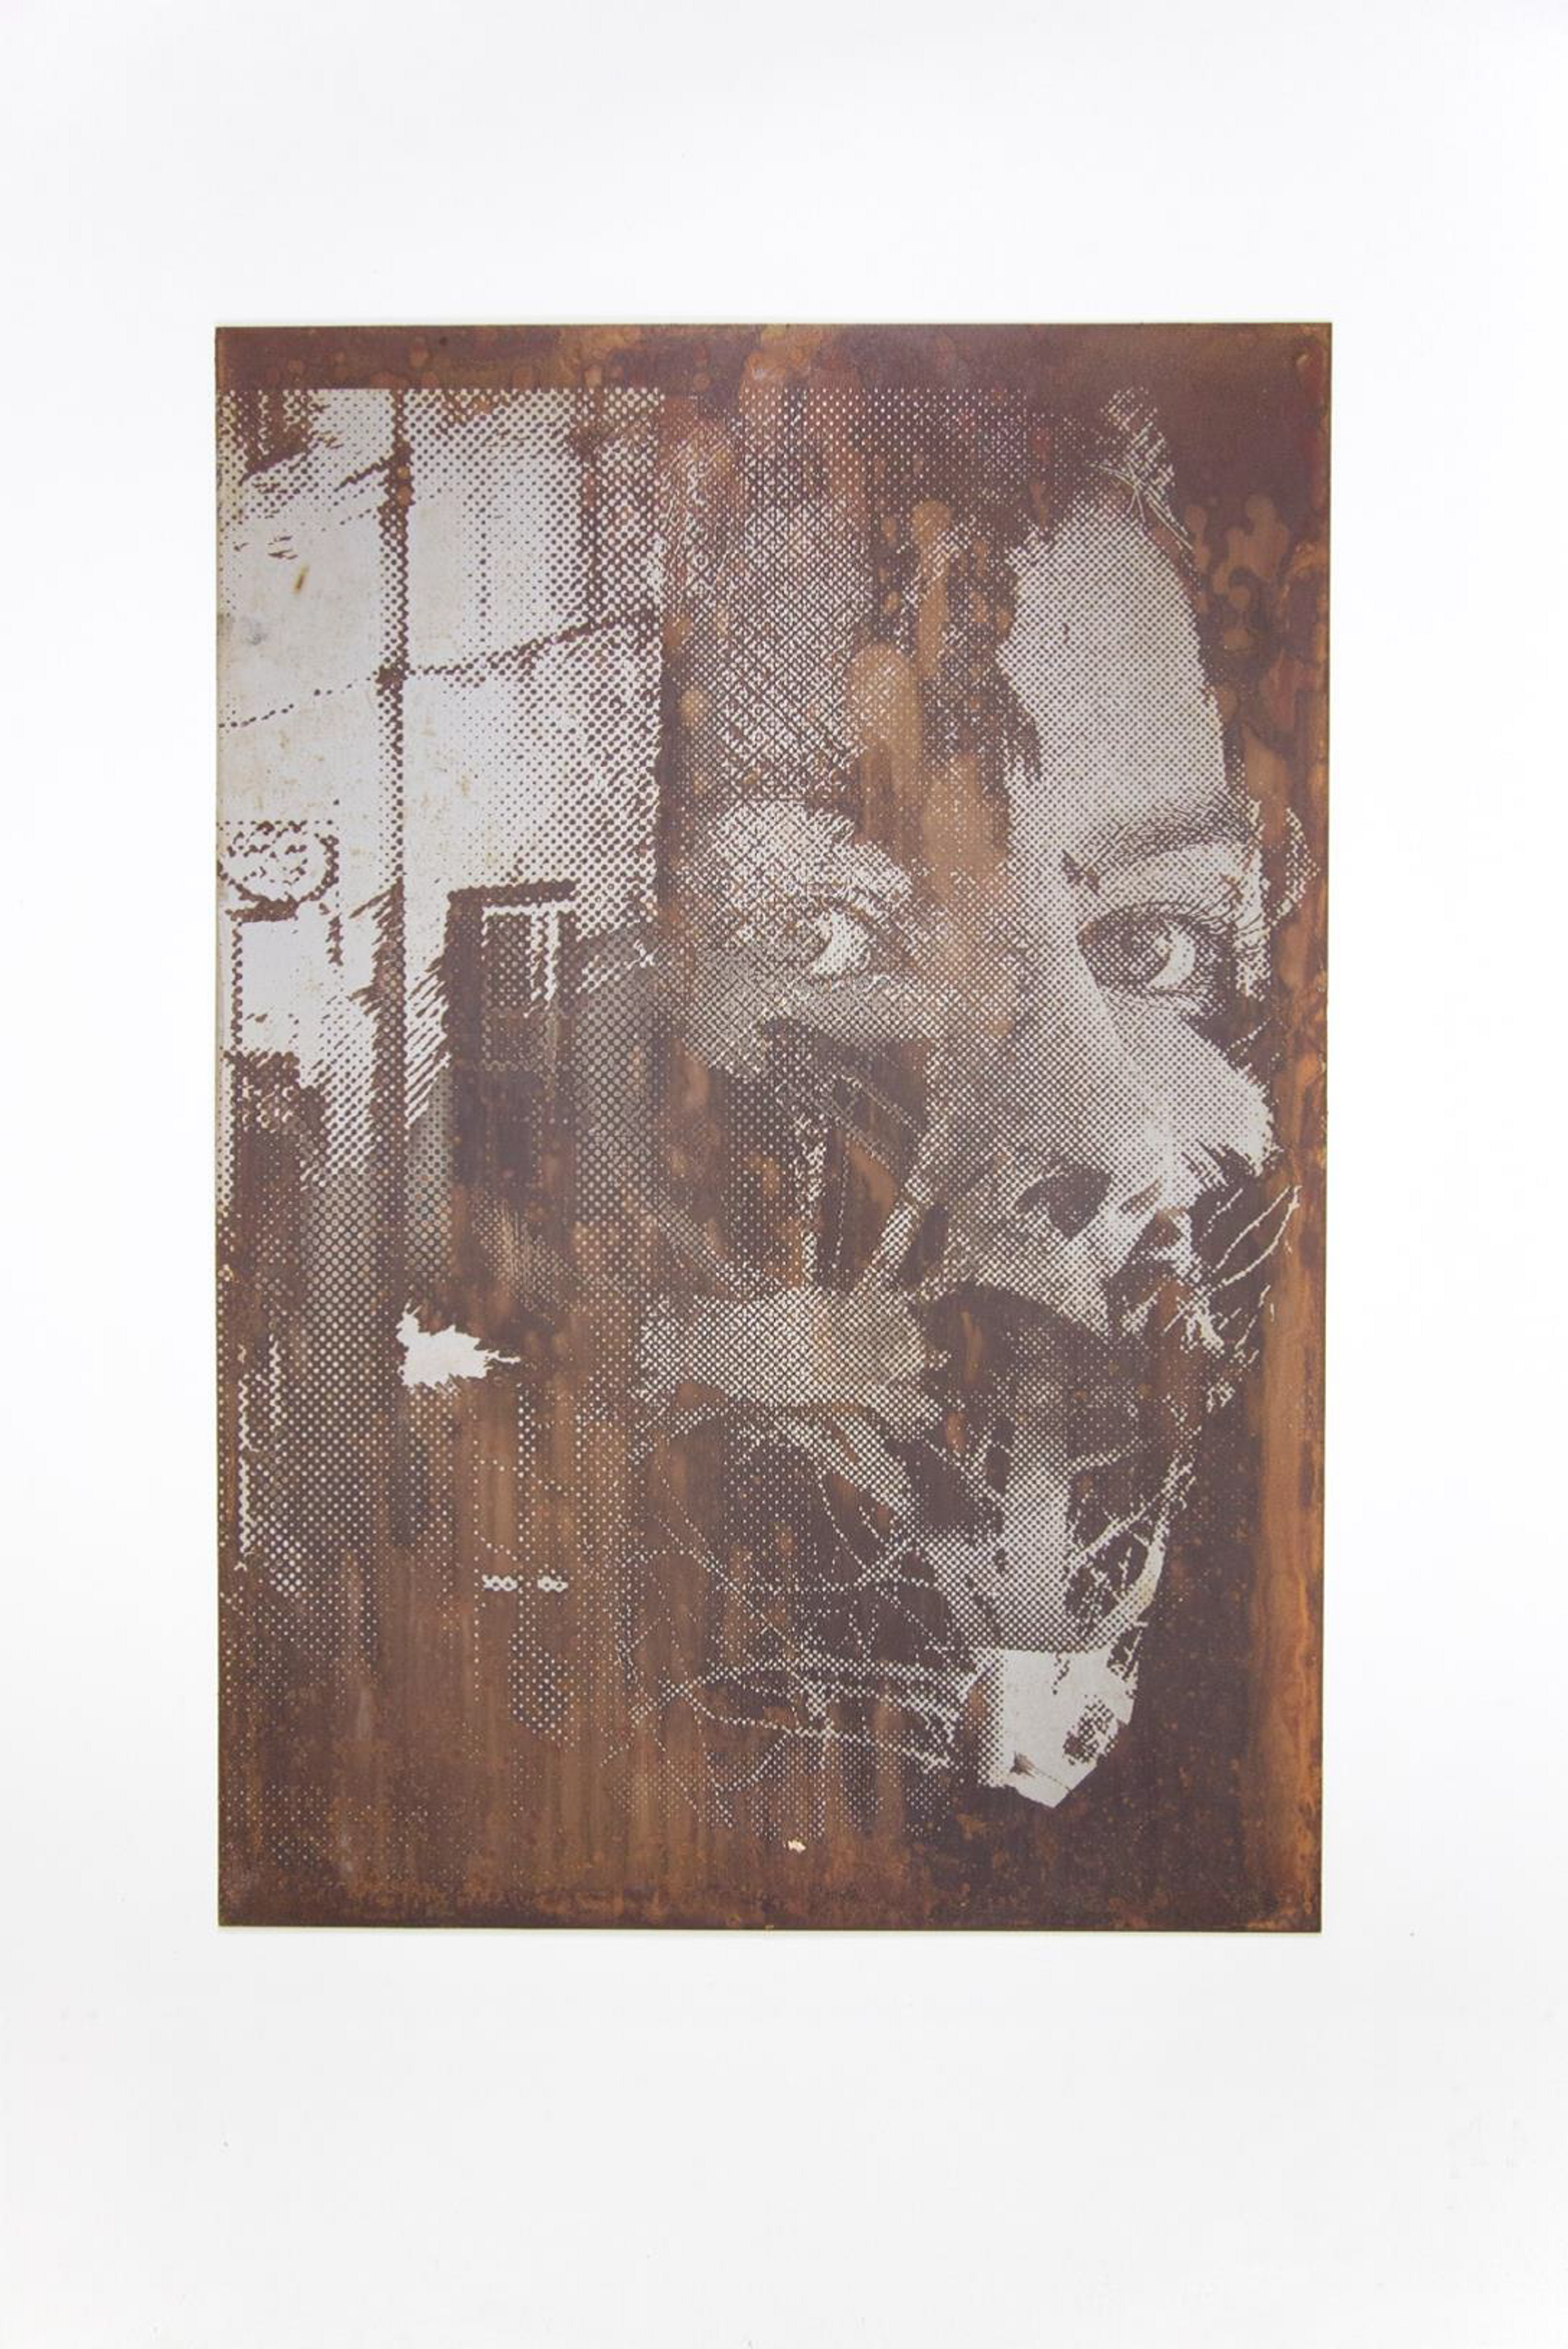 Instant #13 by Vhils